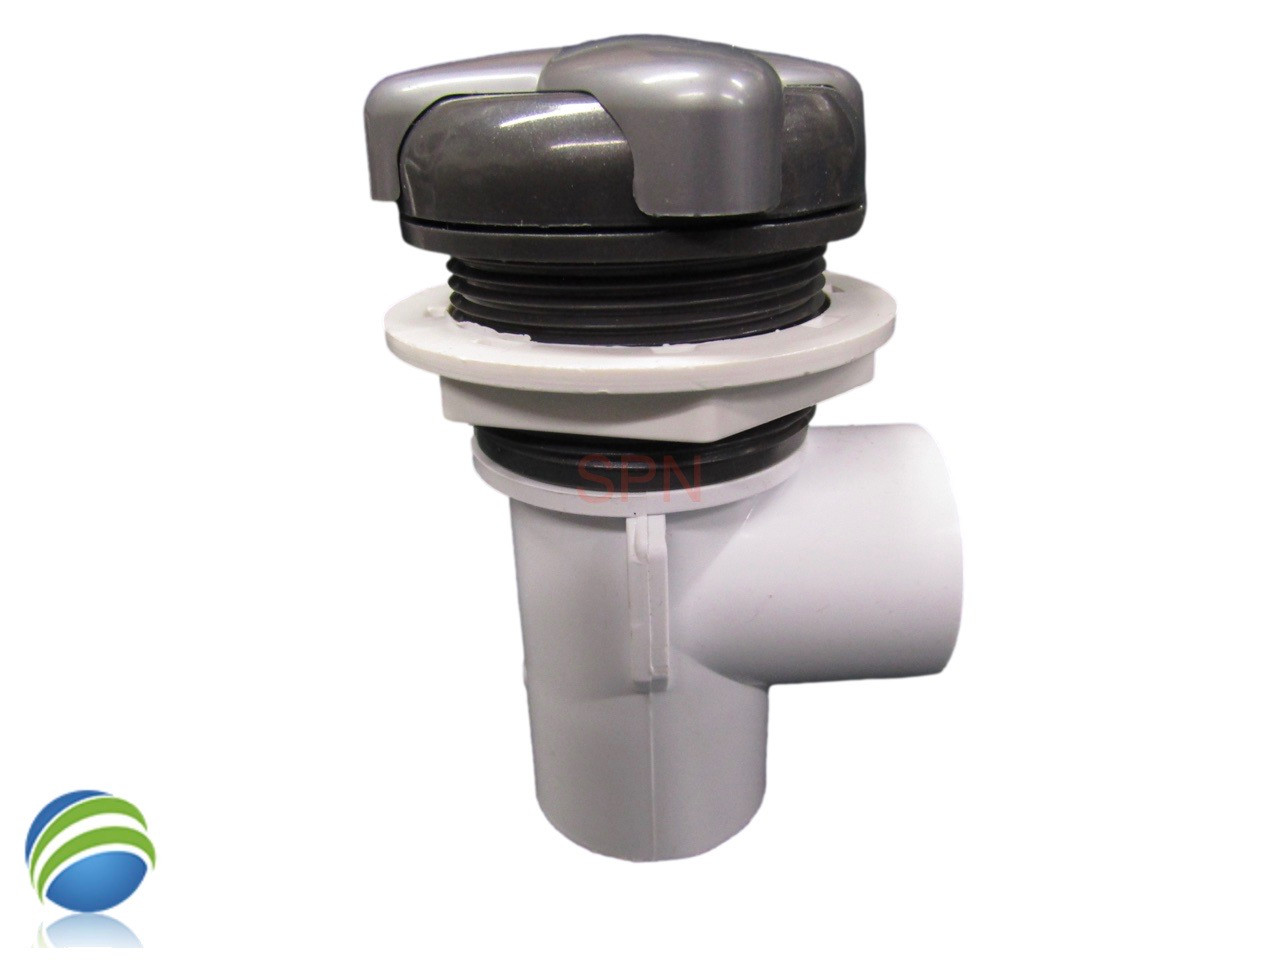 Star Handle Valve , Waterfall or Neck Jet Control, On/Off Valve, Silver and Graphite, 1" Slip x 1" Slip, Single Port